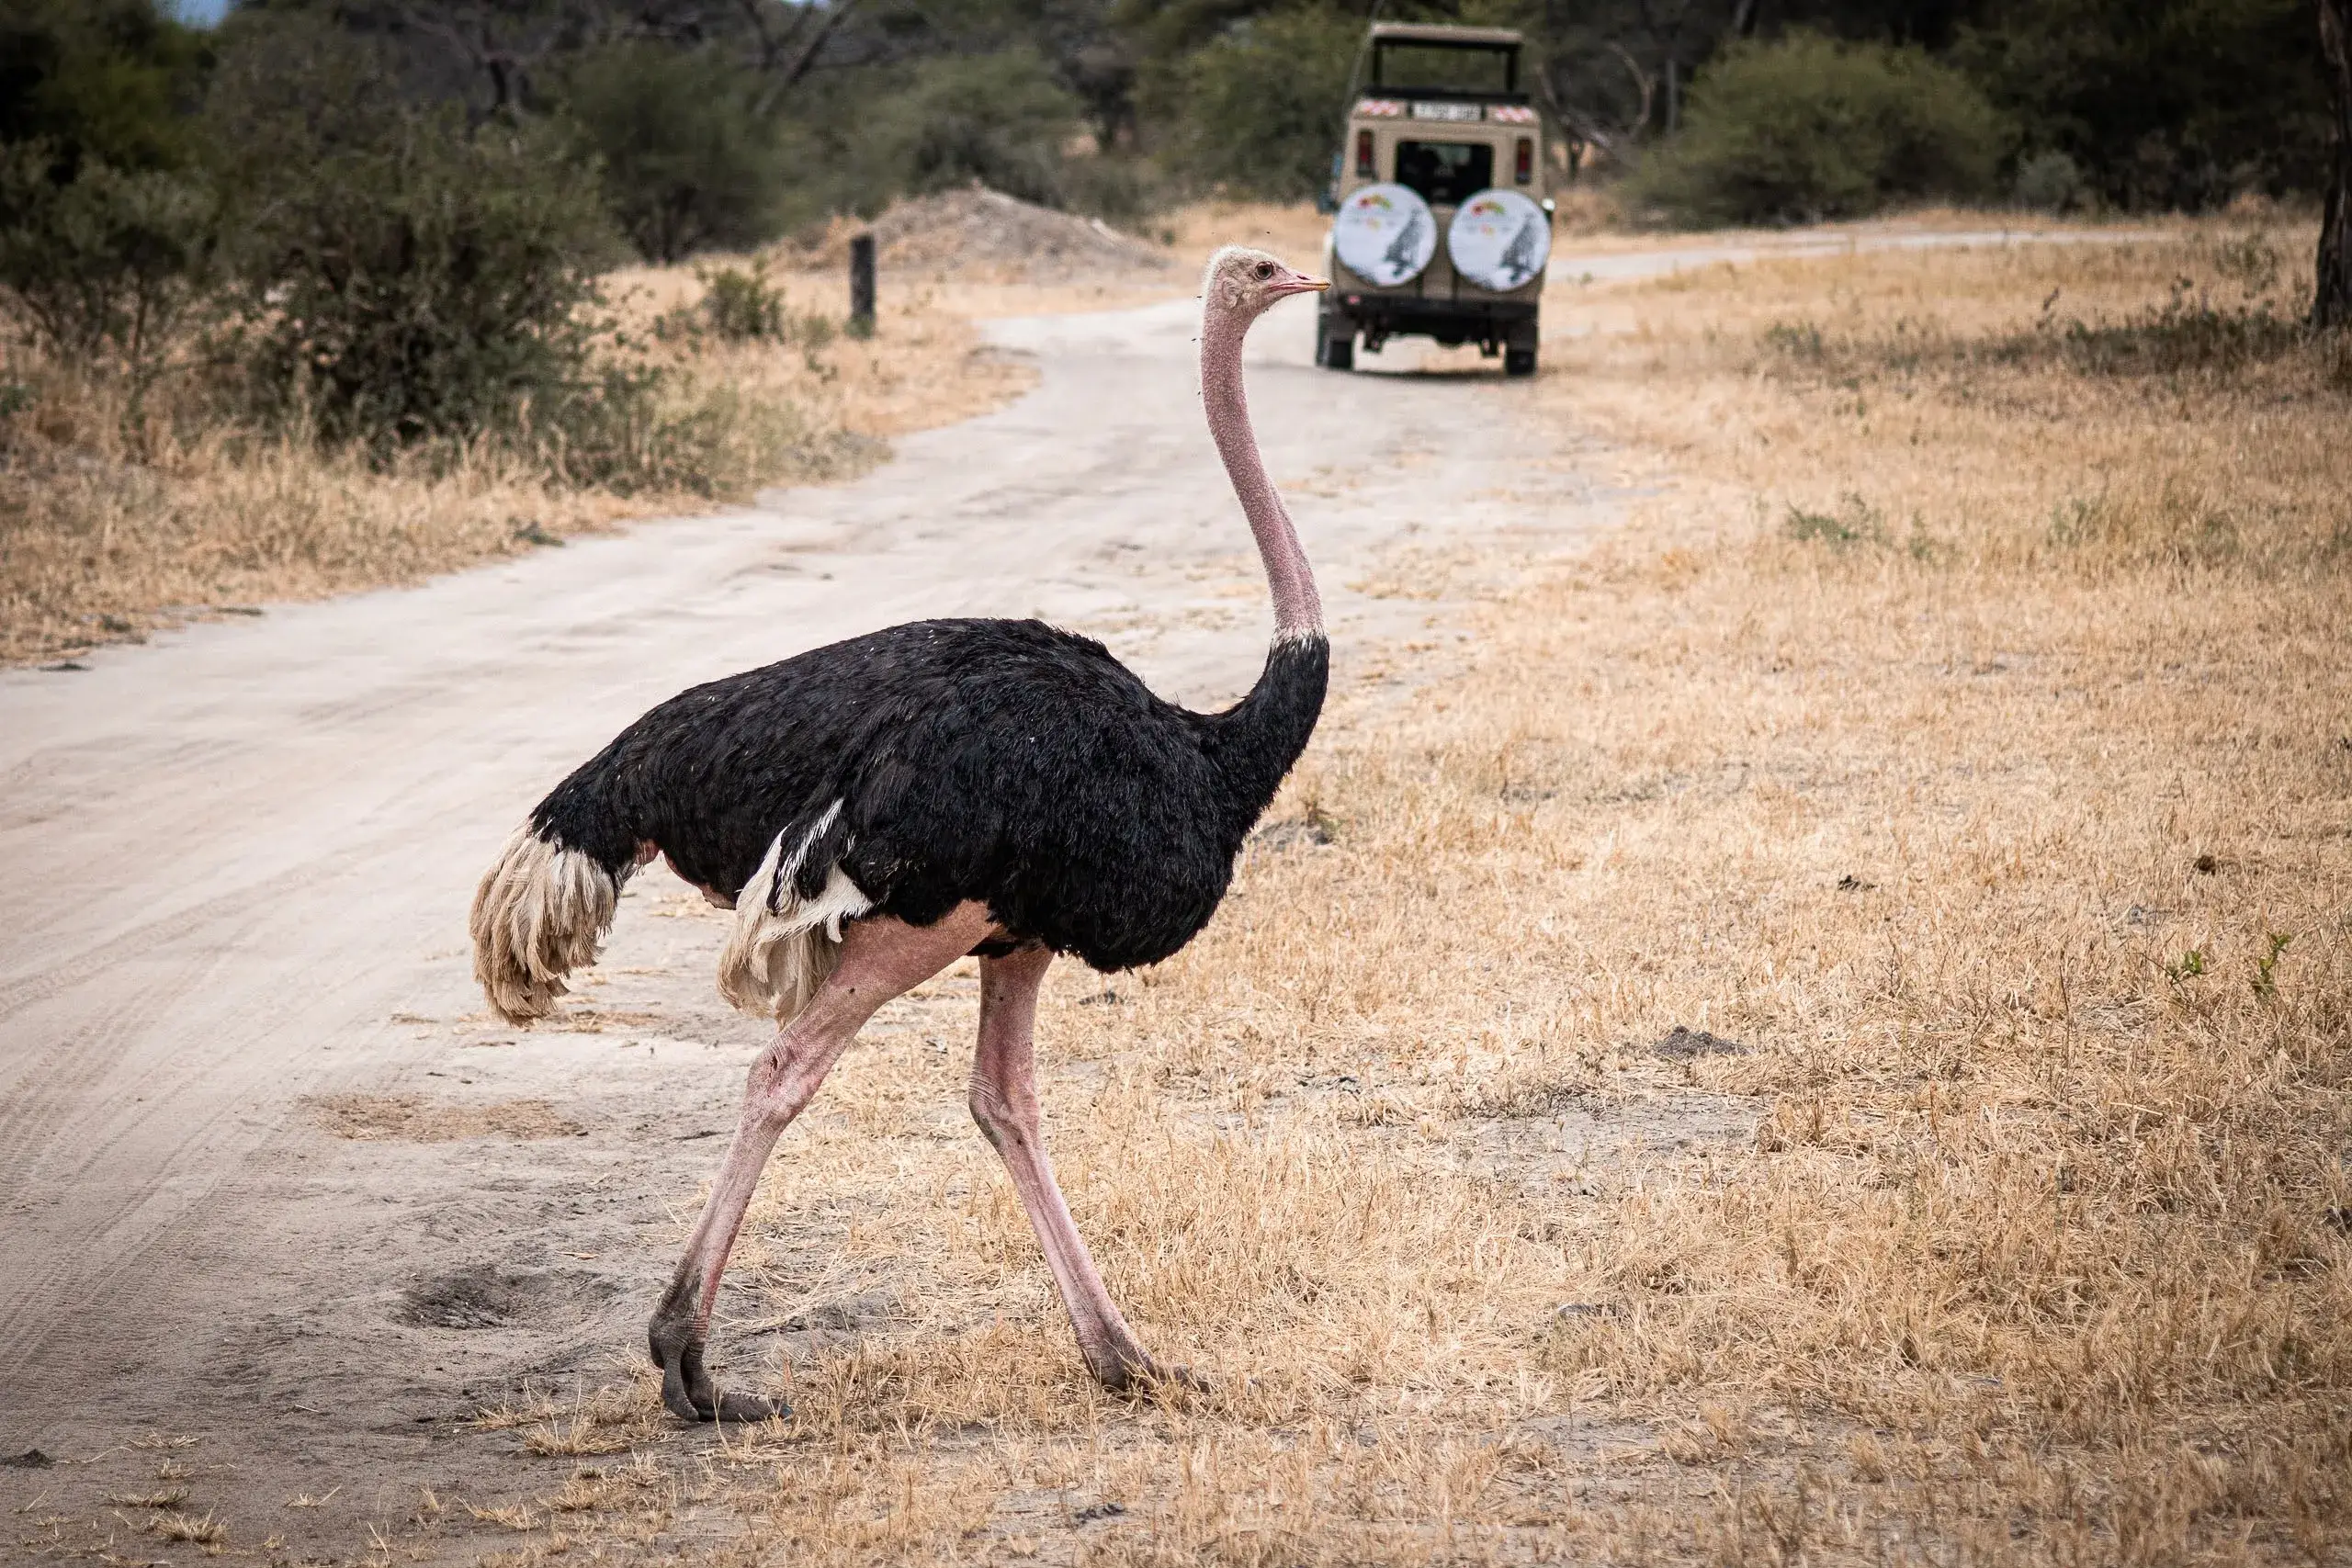 Ostrich spotted while hiking Kilimanjaro